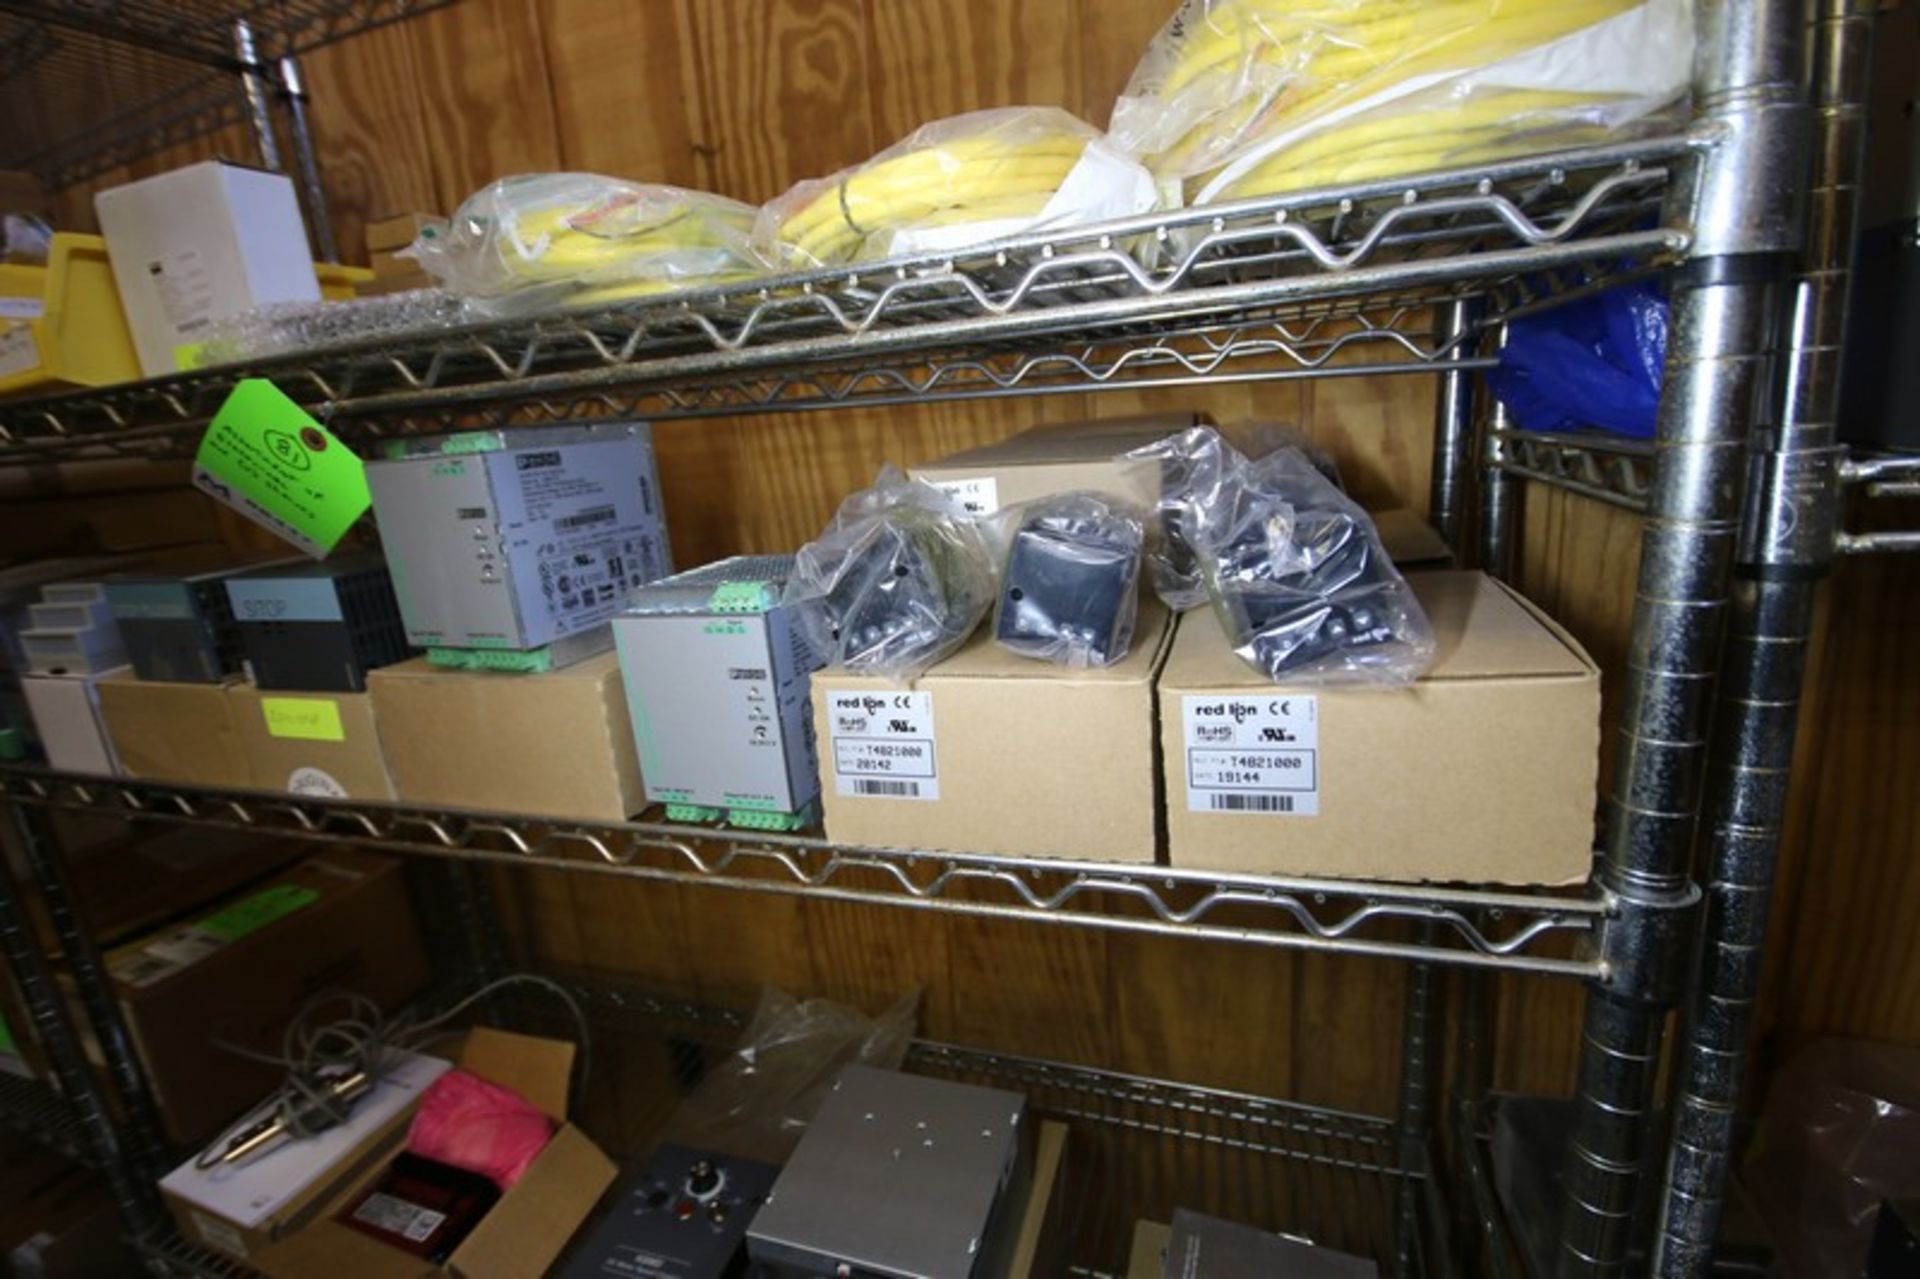 Assortment of Electrical Items on (4) Shelves Including Assortment of Power Supplies Including (2) - Image 4 of 7